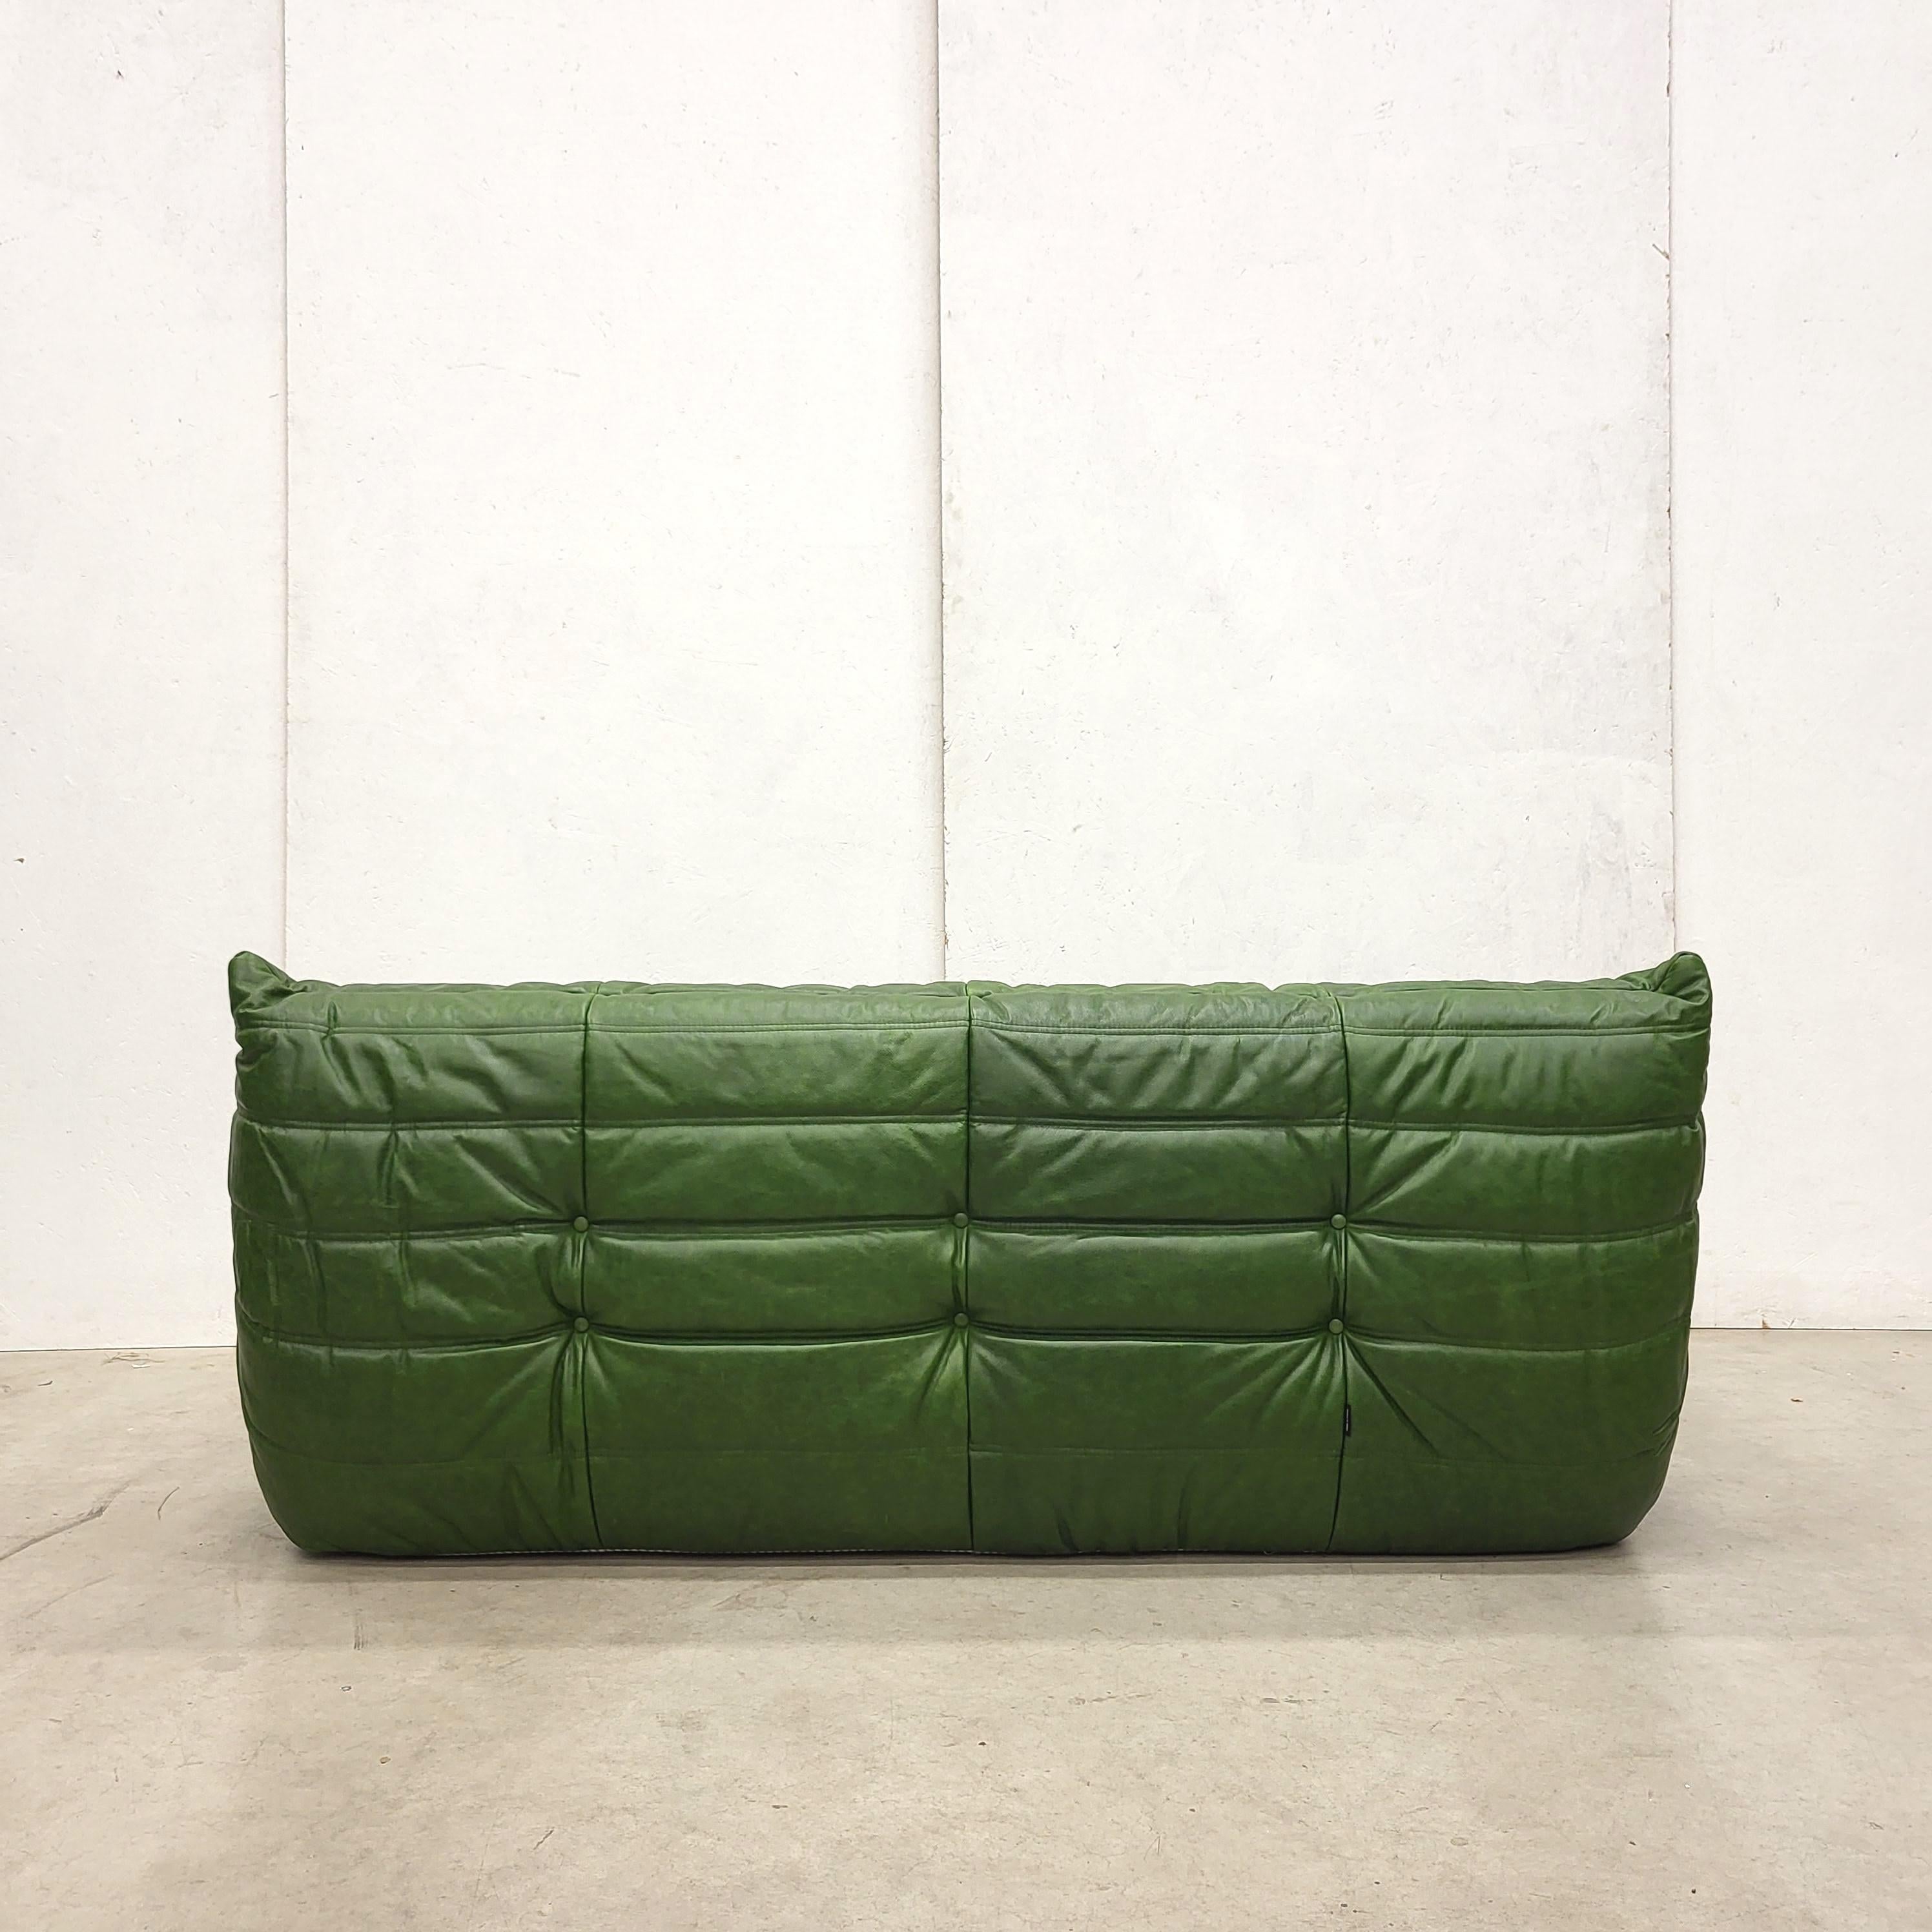 Hand-Crafted Vintage Green Togo Seating Group Sofa by Michel Ducaroy for Ligne Roset 1973